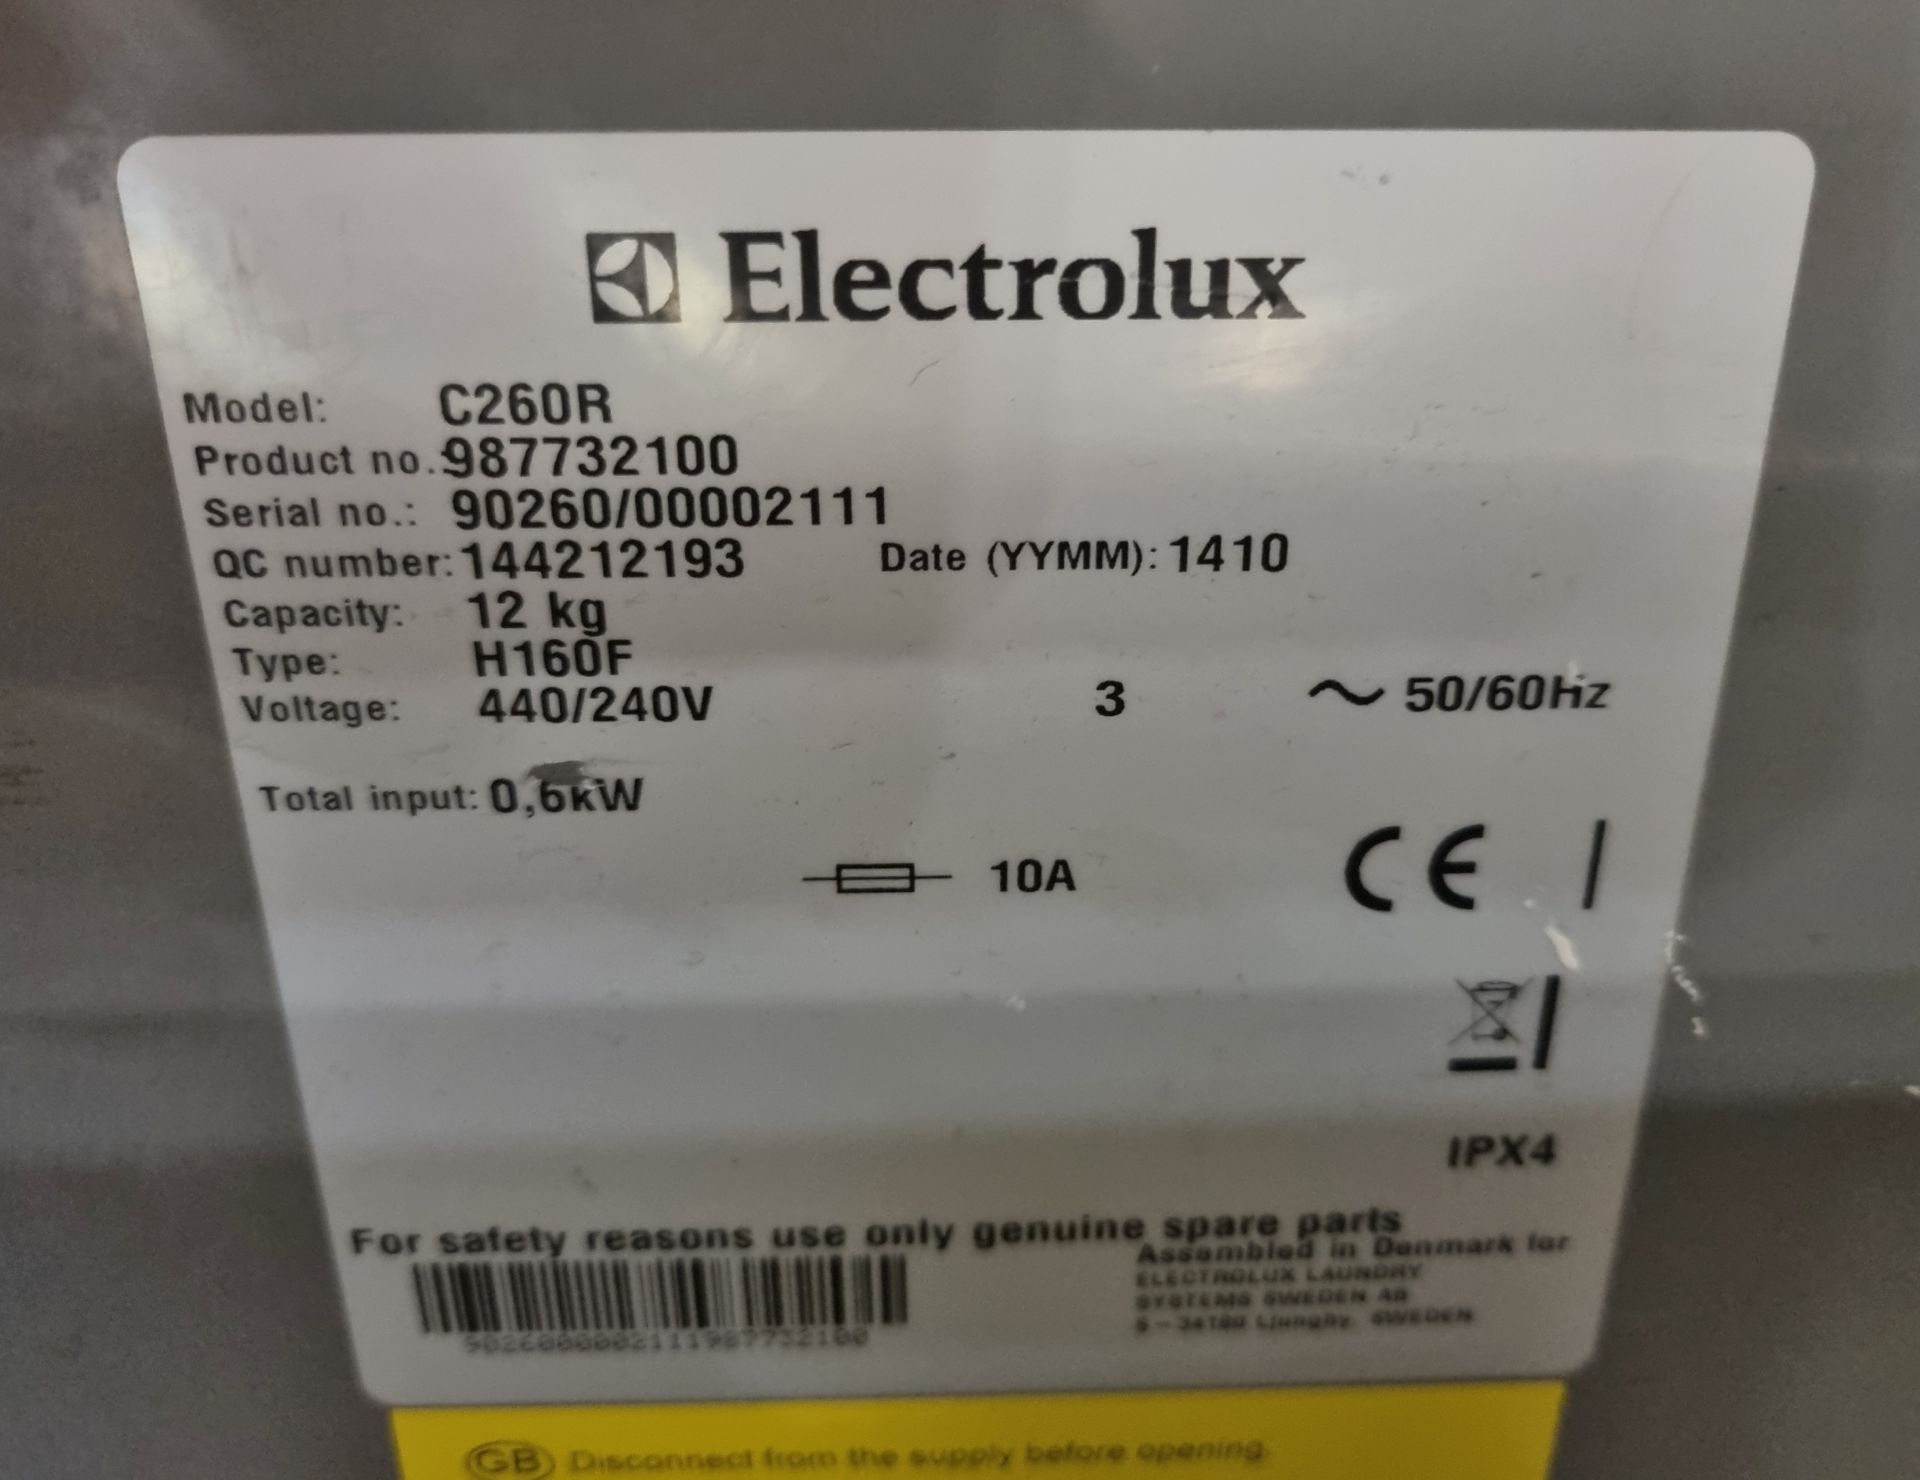 Electrolux C260R 12kg Hydro extractor spin dryer (Missing lower side cover) - 415V - Image 6 of 6